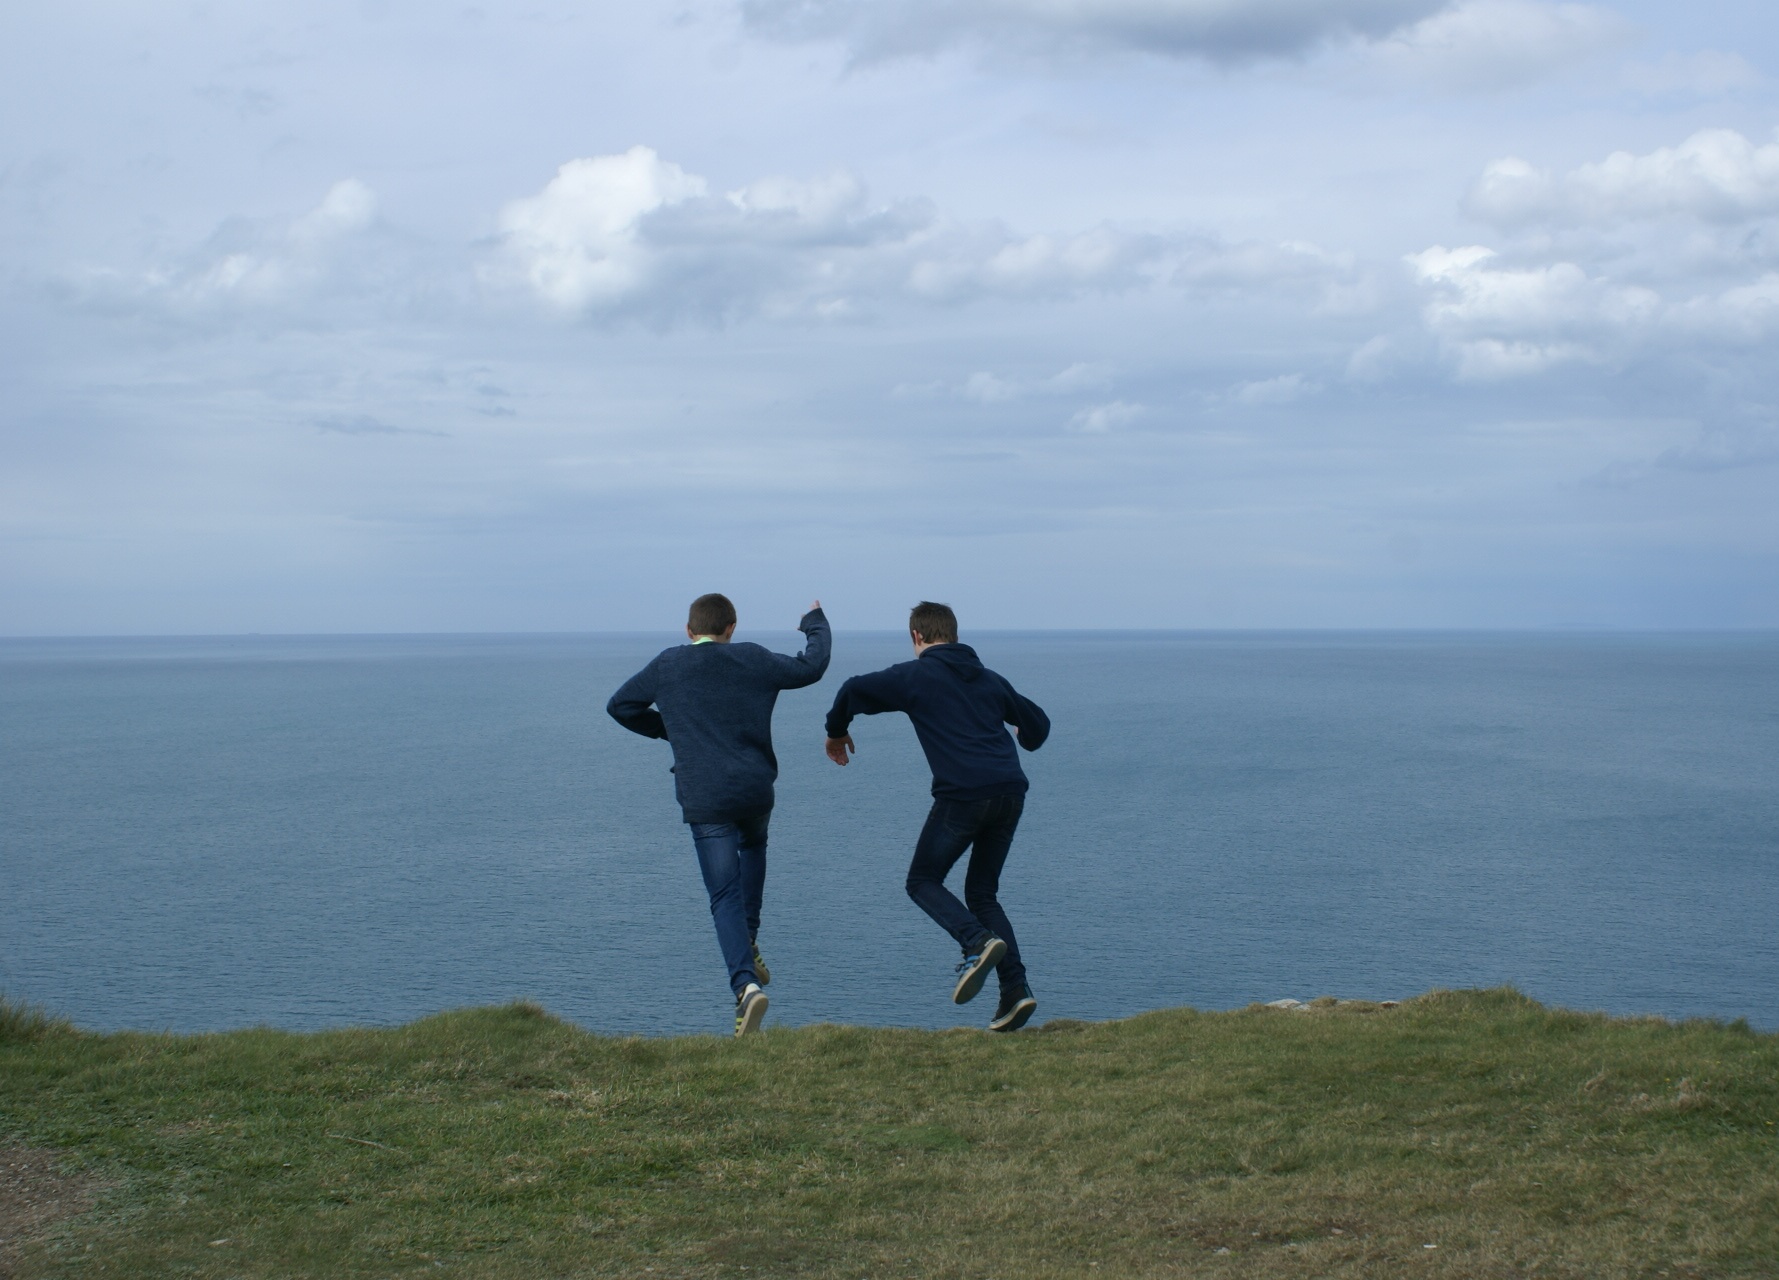 Jumping off the cliff at Tintagel?